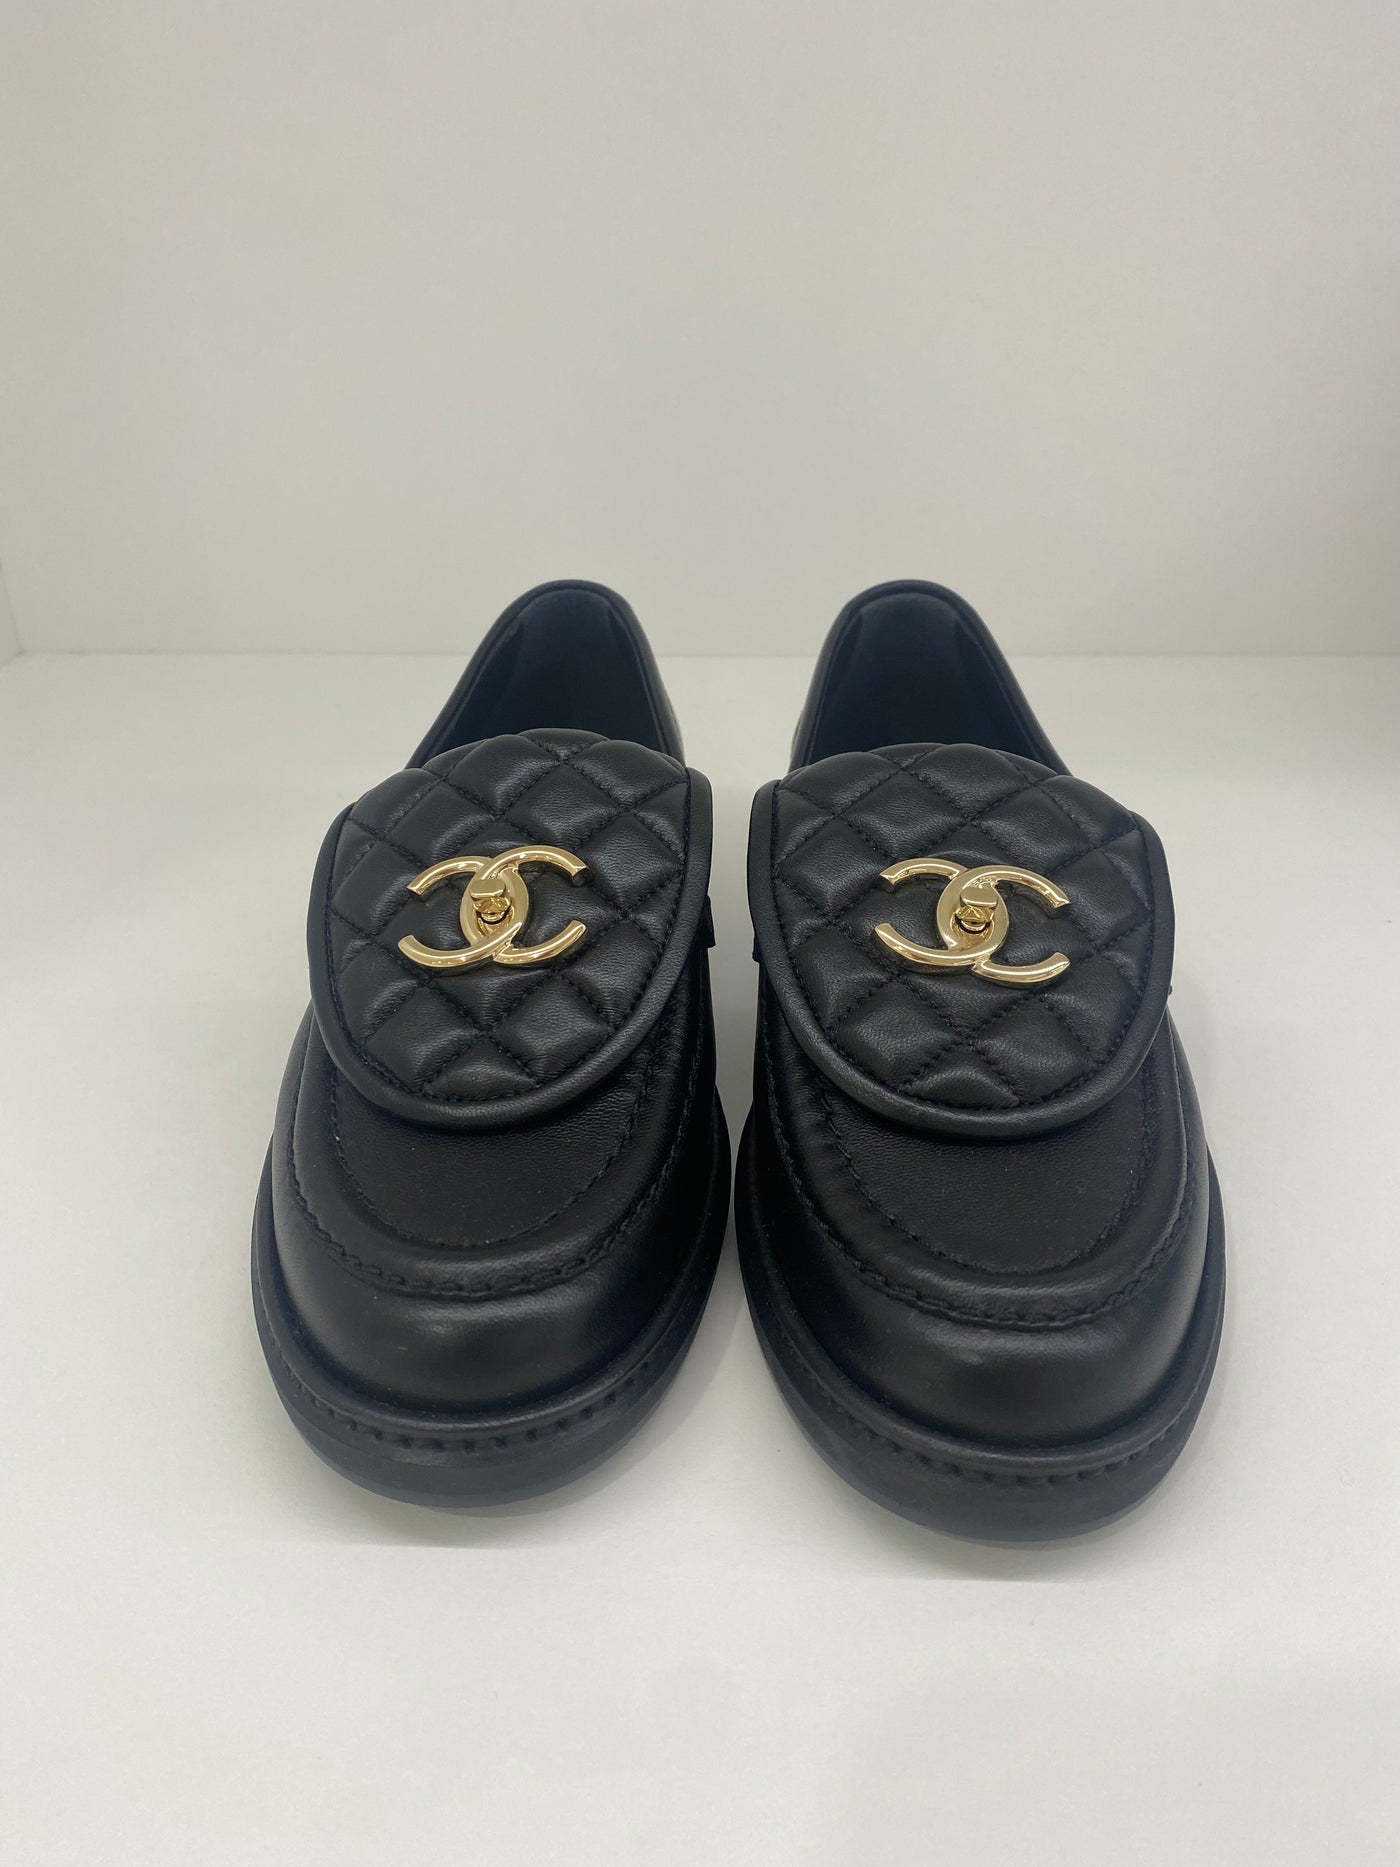 Chanel Quilted Turnlock CC Loafers - SOLD